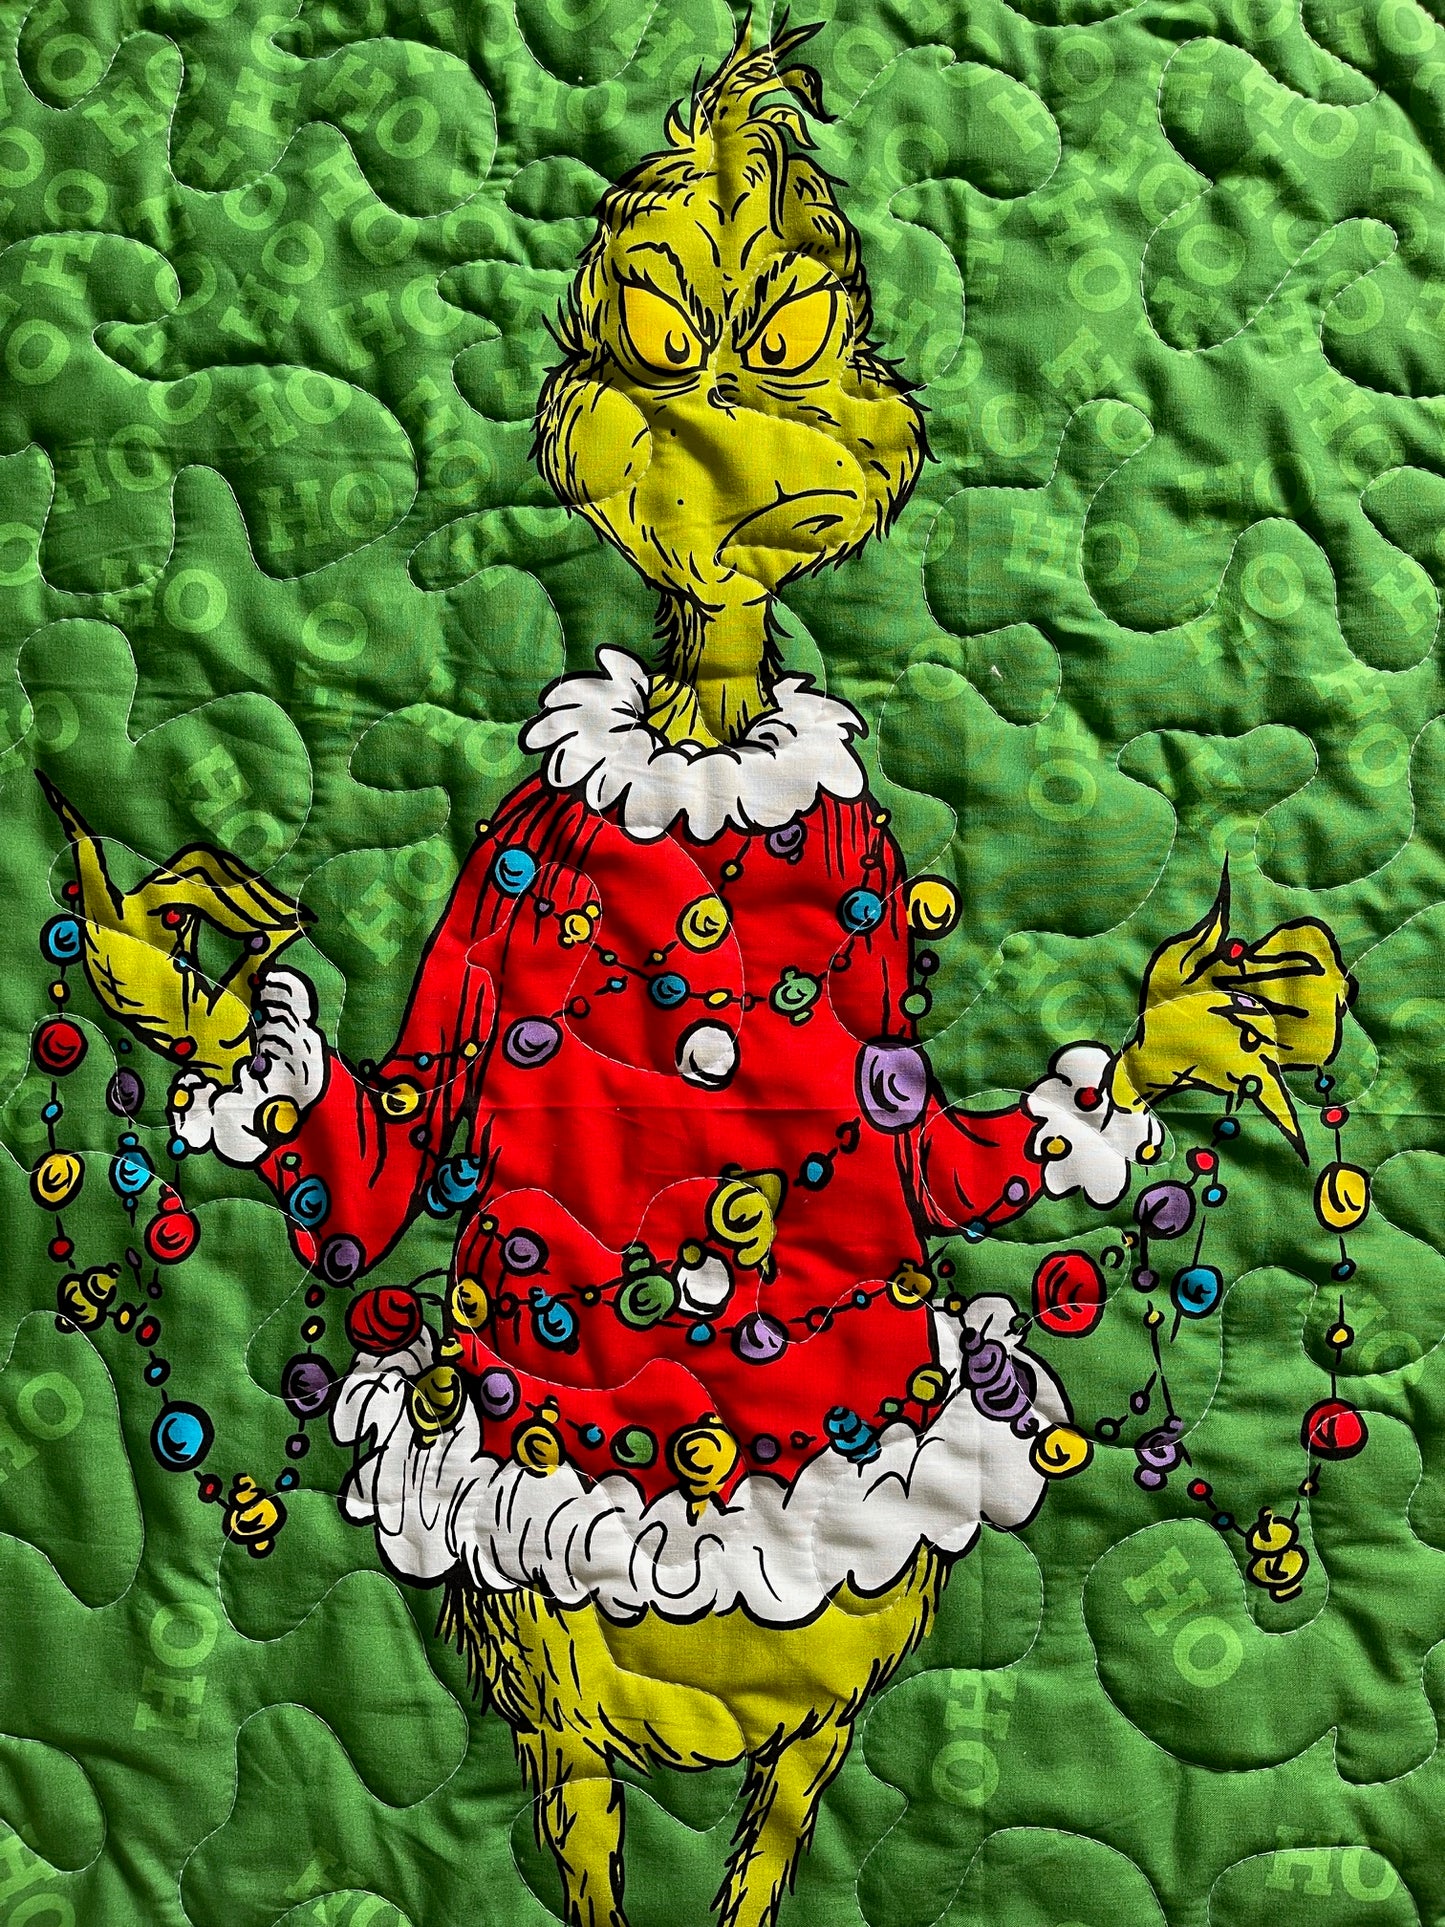 HOW THE GRINCH STOLE CHRISTMAS Inspired Quilted Blanket GRINCH GRINCH GRINCH GRINCHMAS